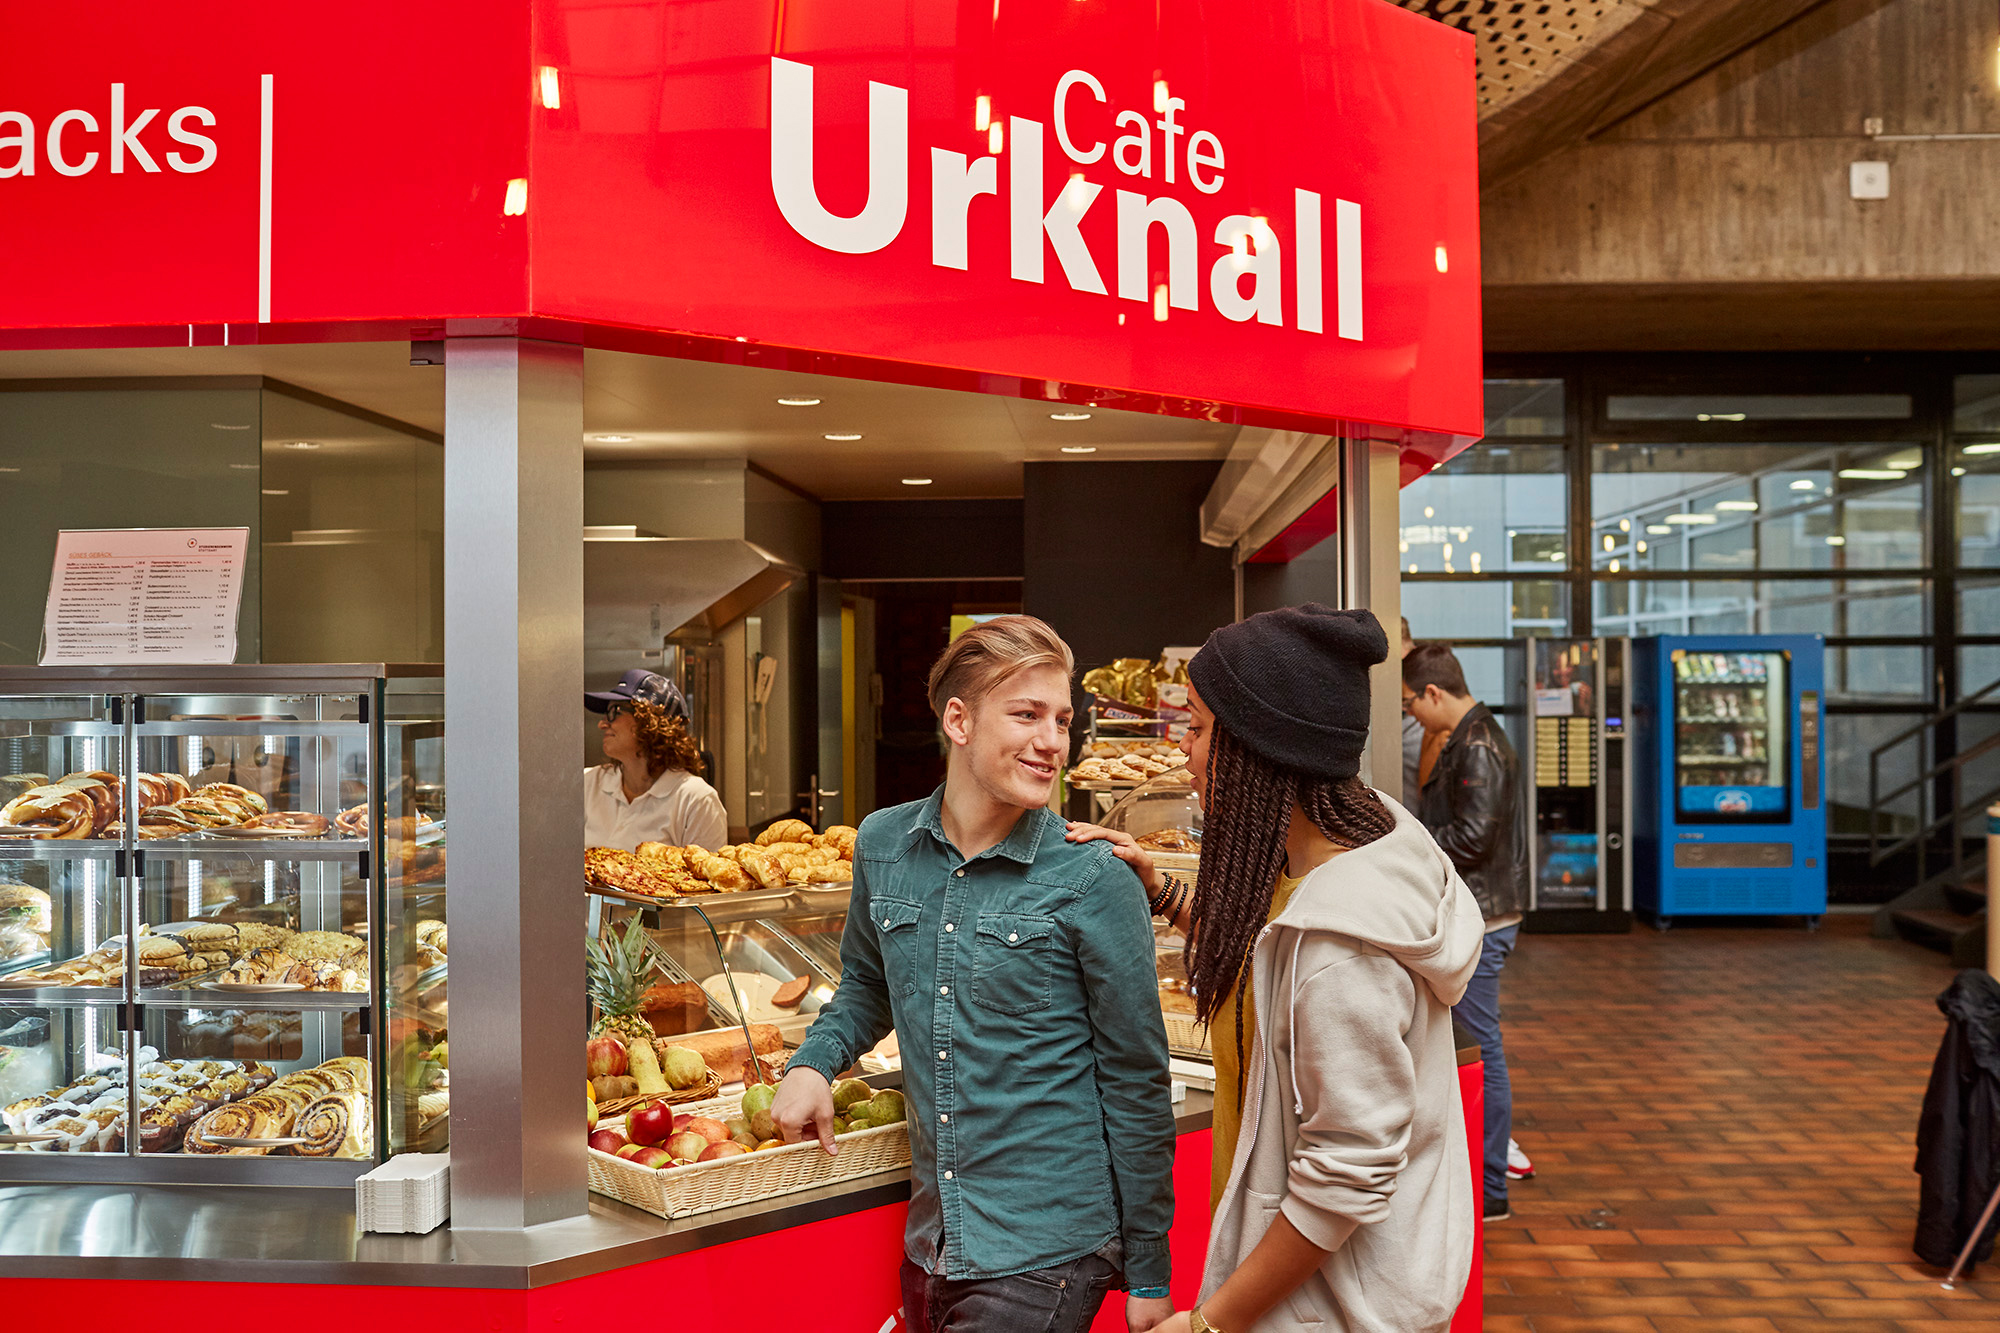 Students chatting at the counter of the Urknall cafeteria